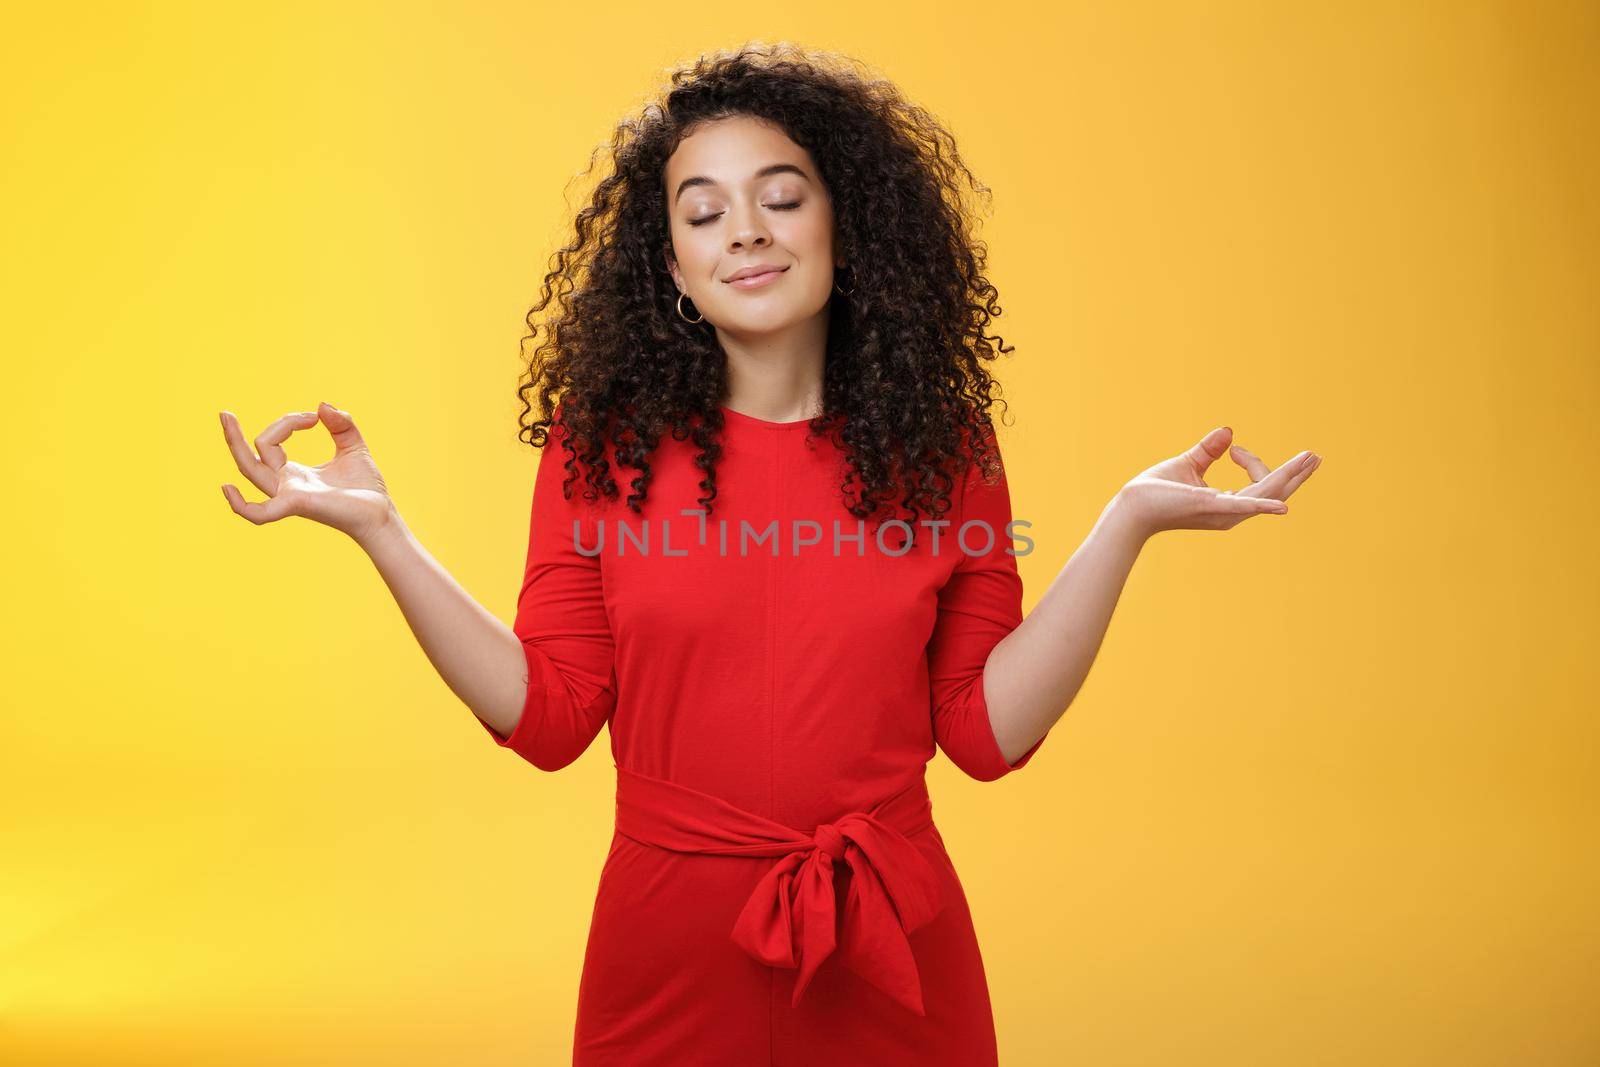 Charming dreamy and happy peaceful woman in red dress with curly hair standing in lotus pose with mudra orbs or zen gesture and closed eyes, meditation relieving stress, feeling unbothered. Body language, buddhism and people concept